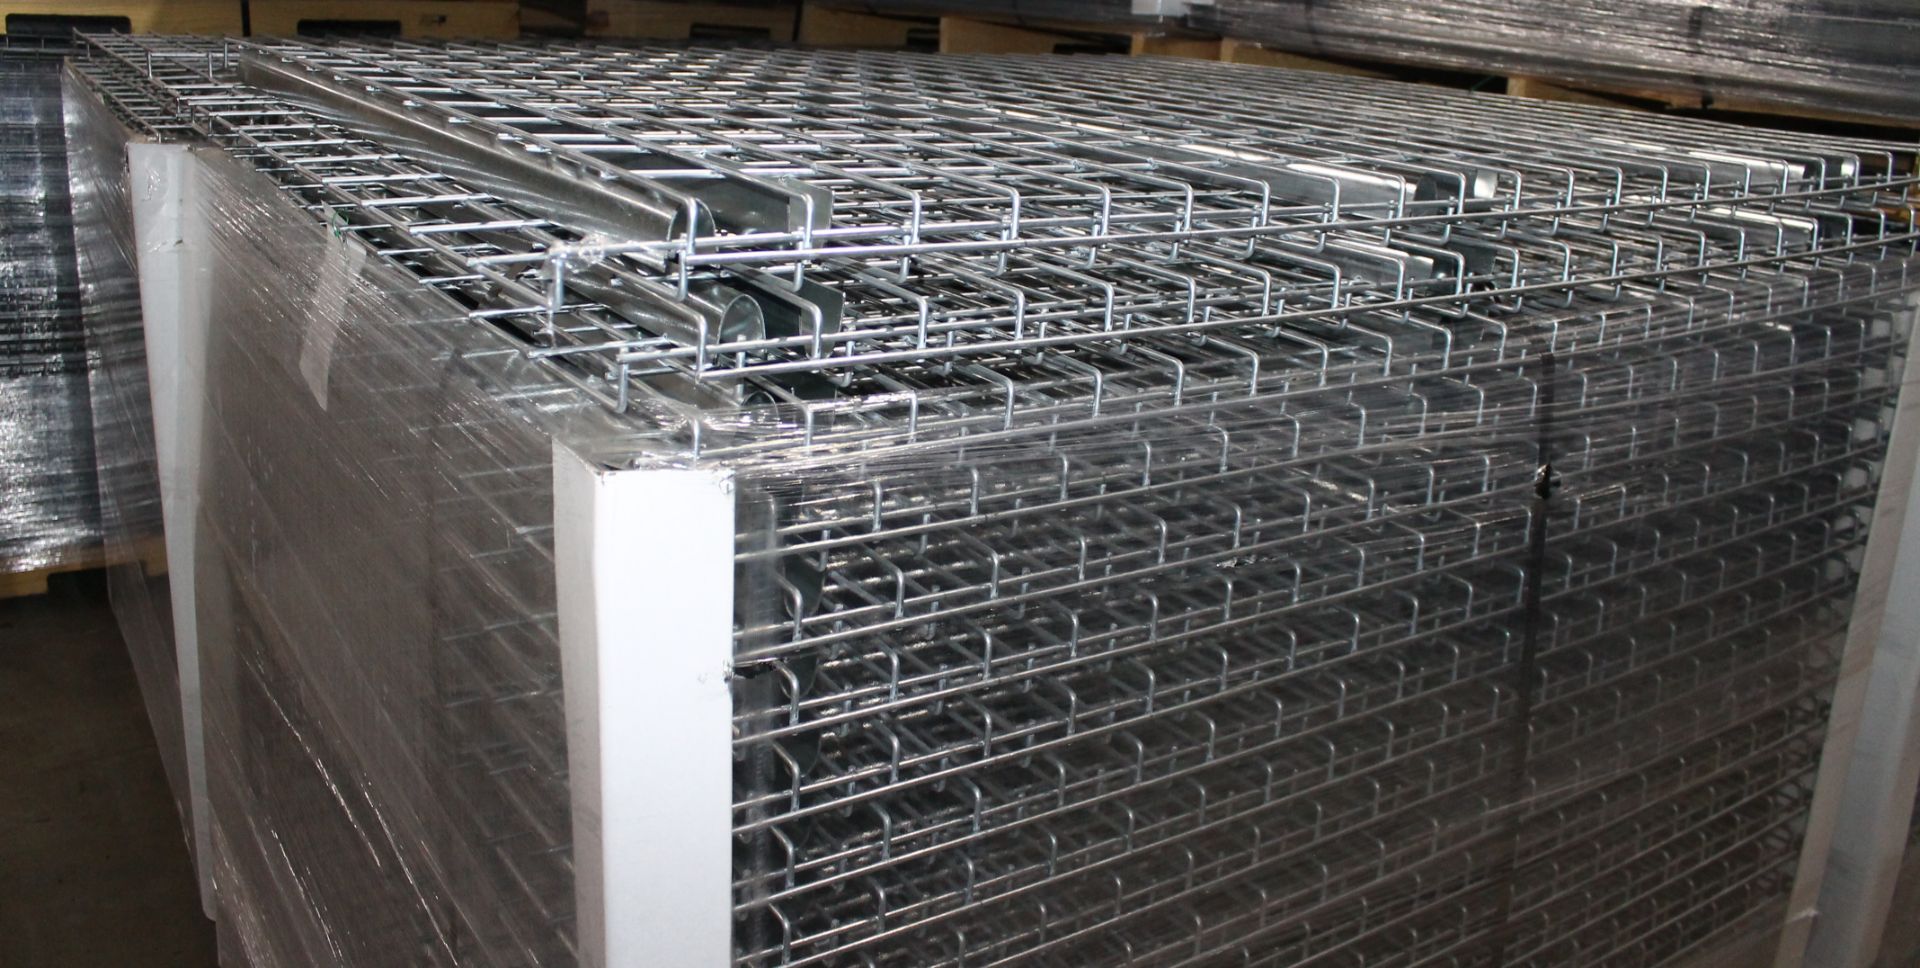 NEW 40 PCS OF STANDARD 48" X 53" WIREDECK - 2000 LBS CAPACITY - Image 2 of 2